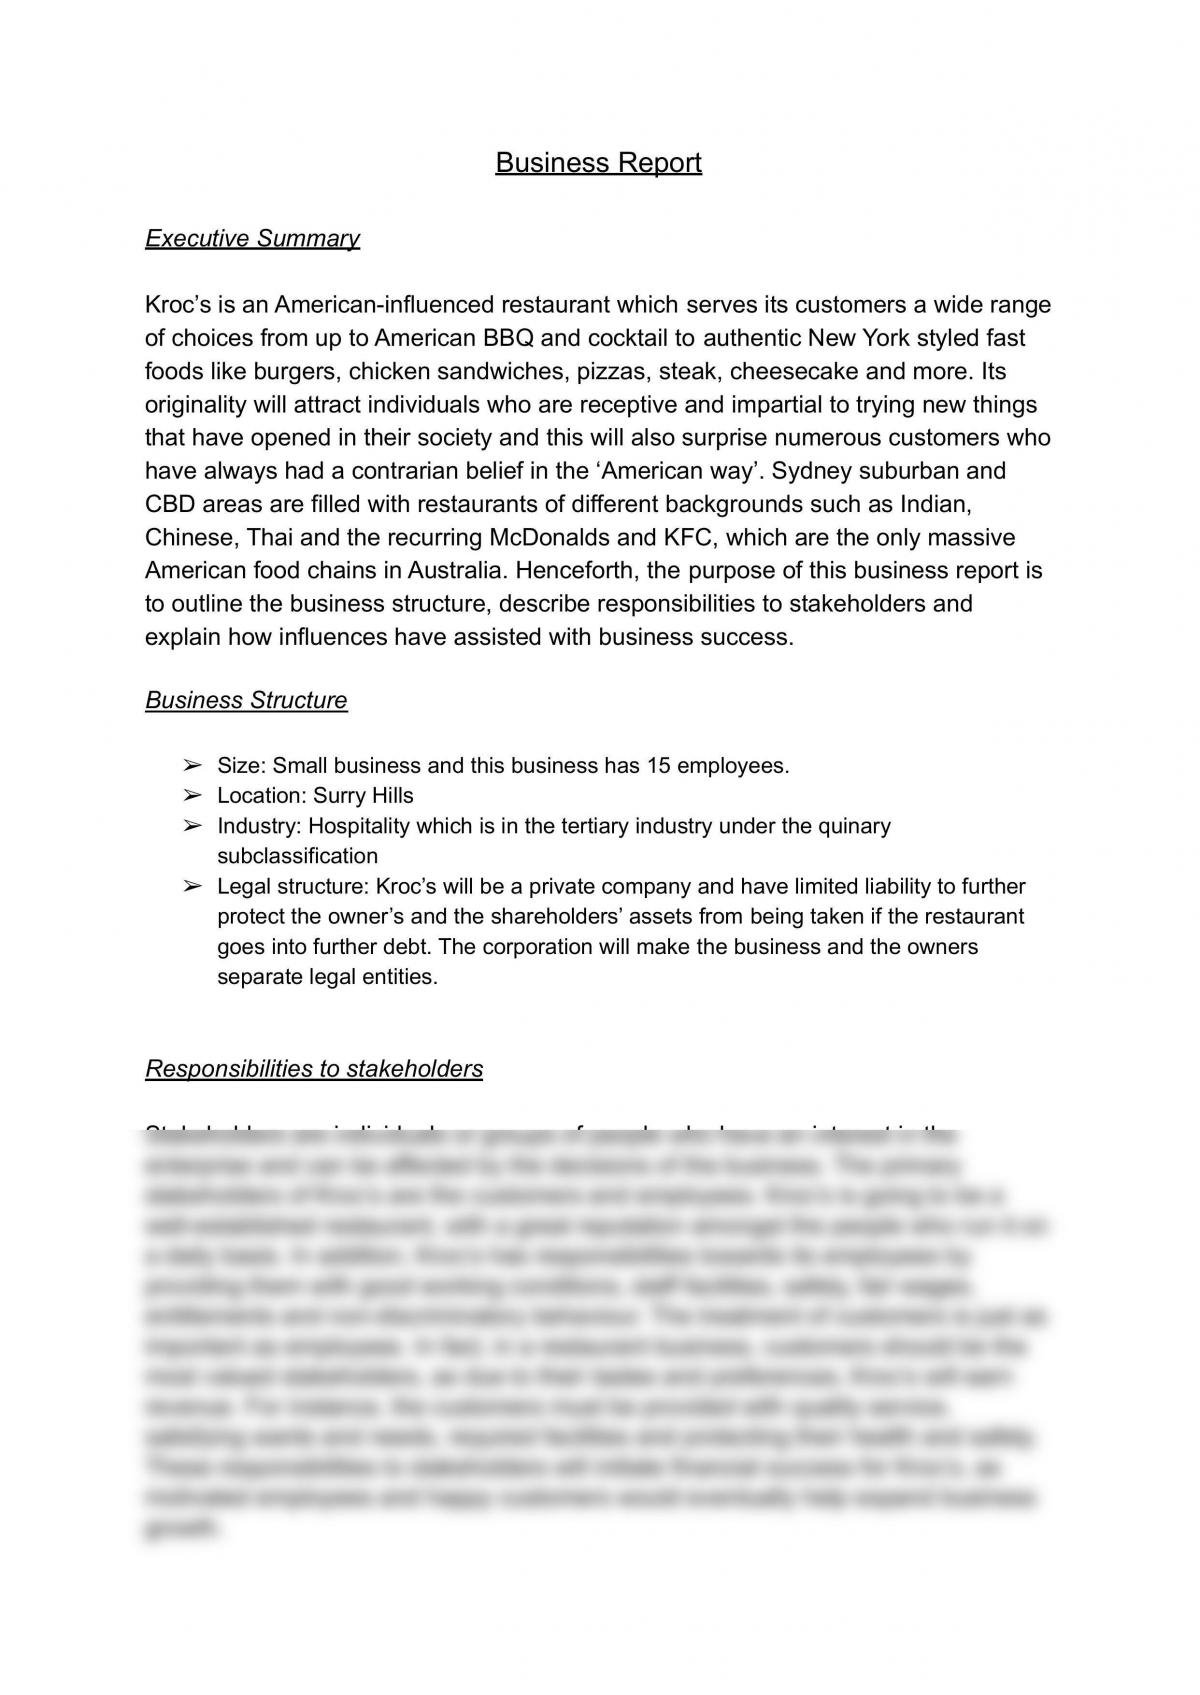 Business Studies Business Report Assignment - Page 1